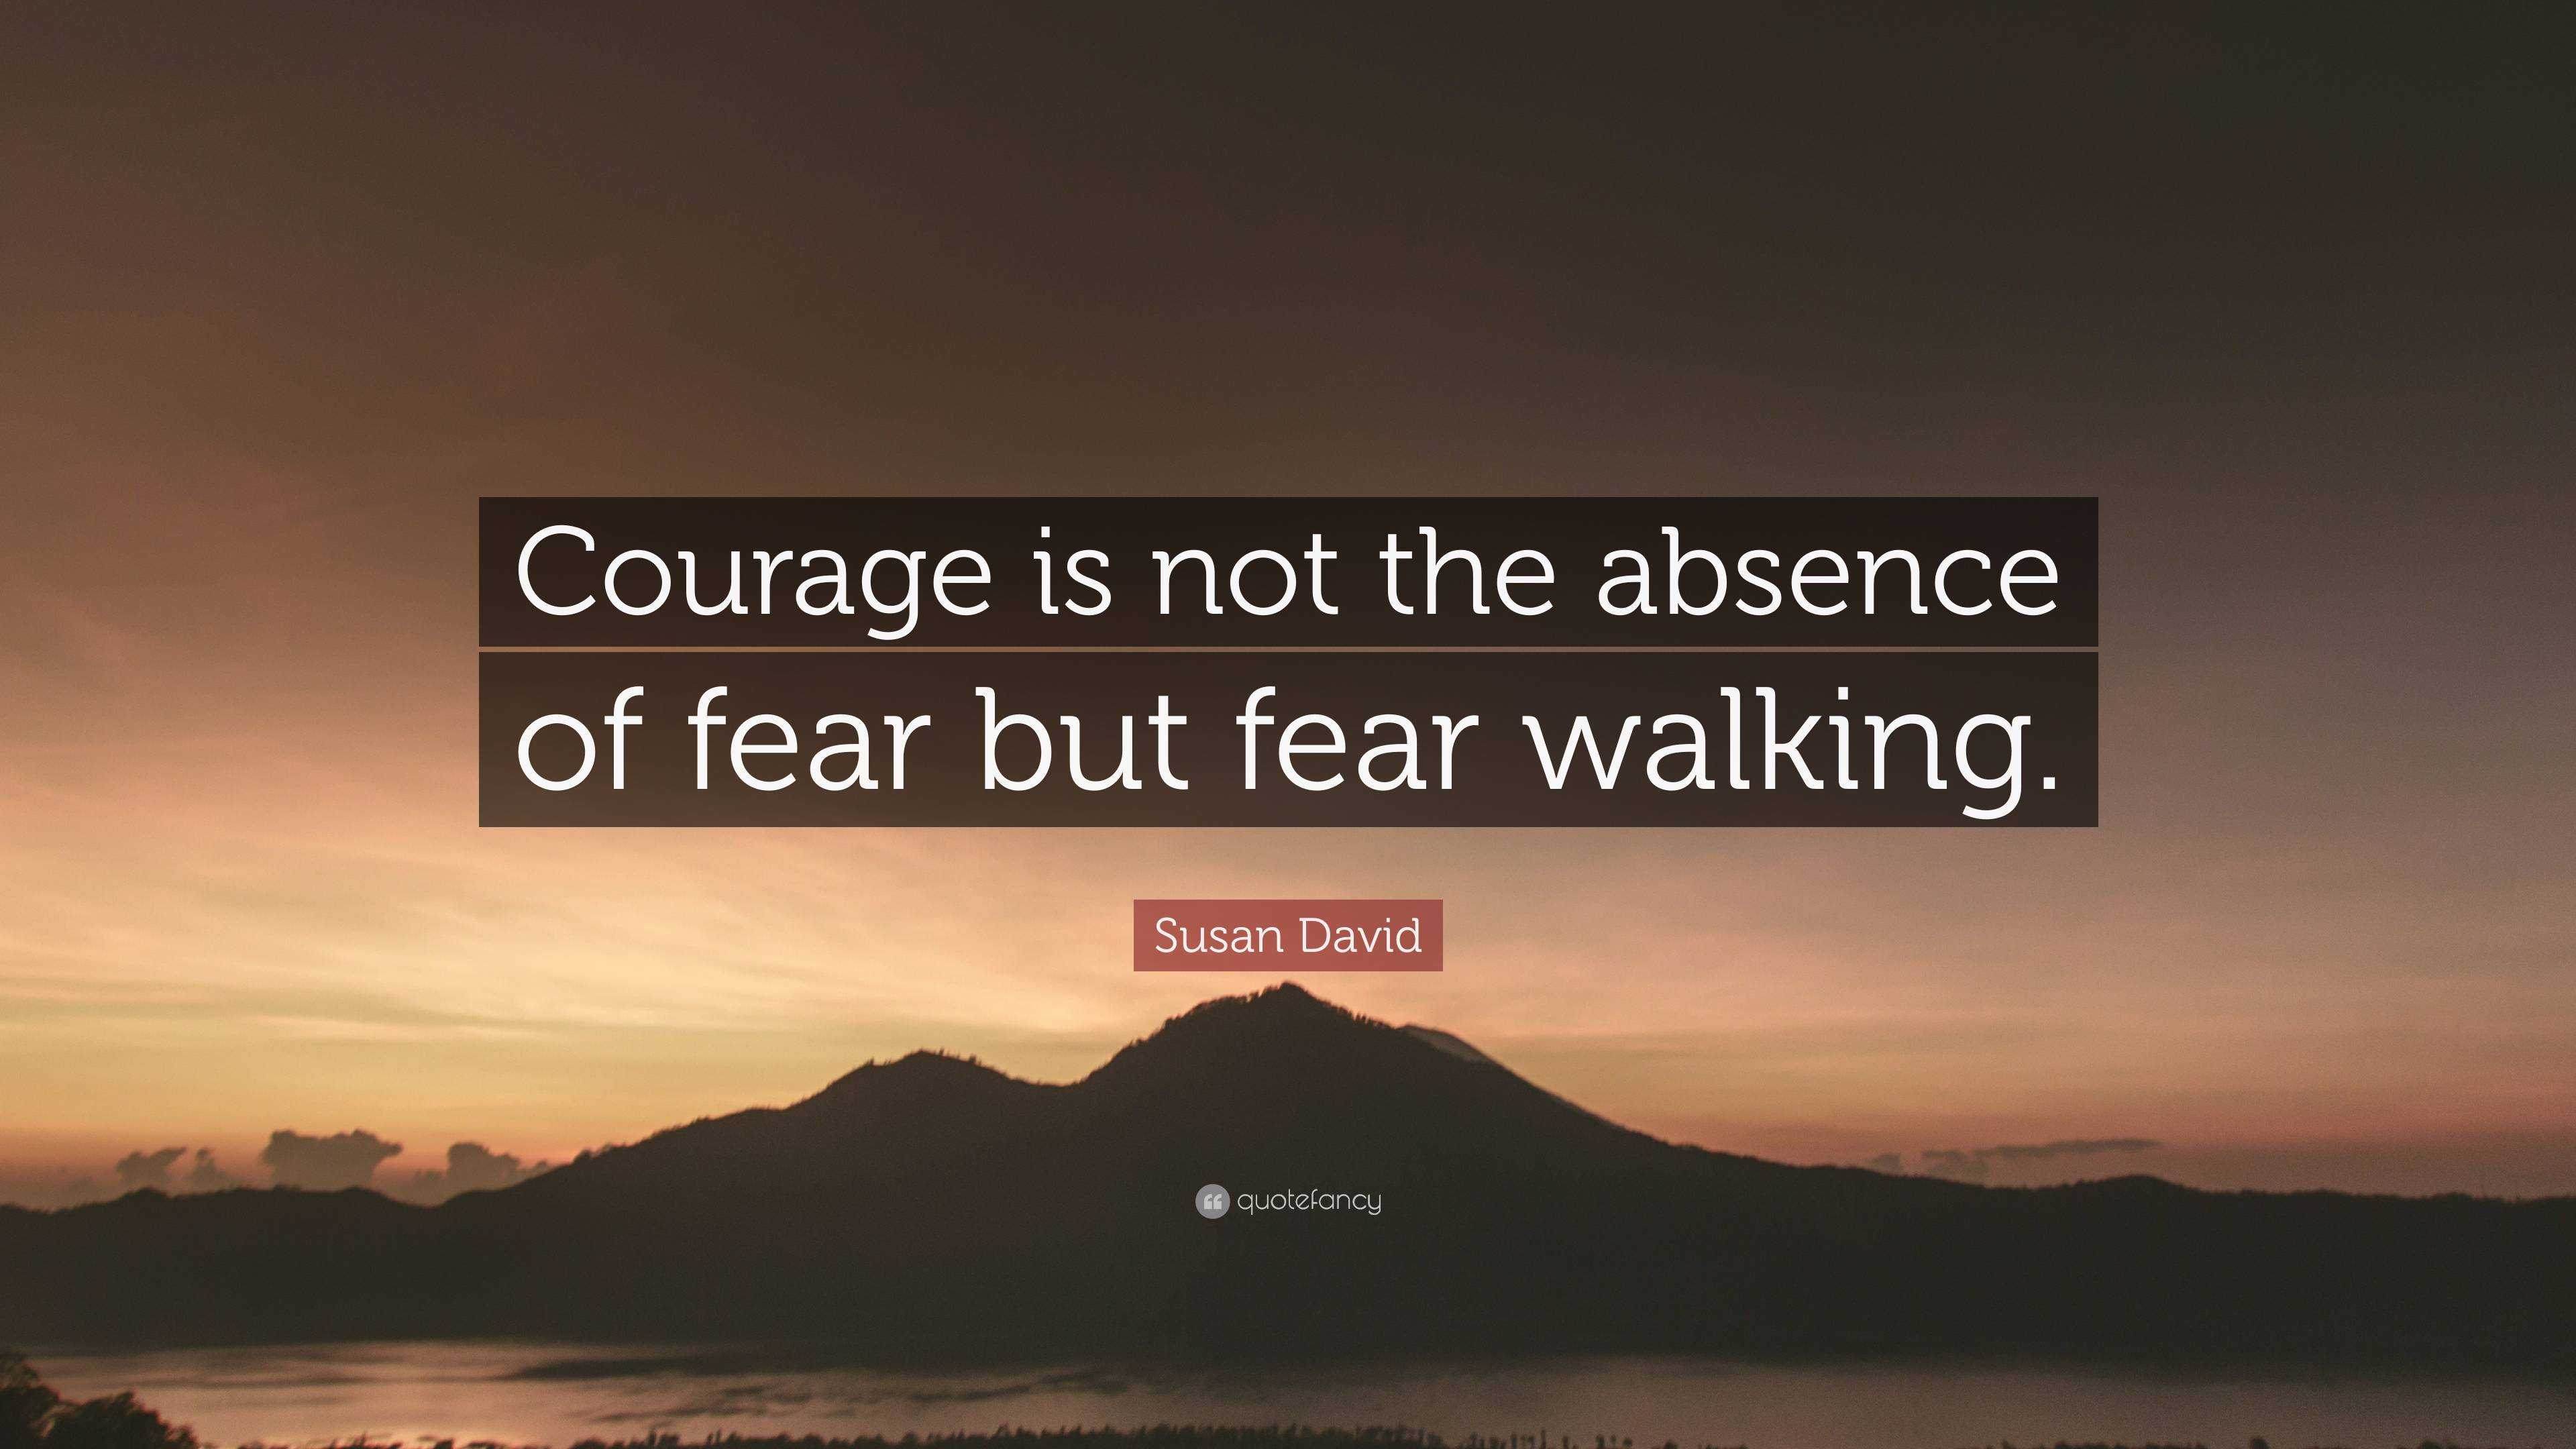 Susan David Quote: “Courage is not the absence of fear but fear walking.”